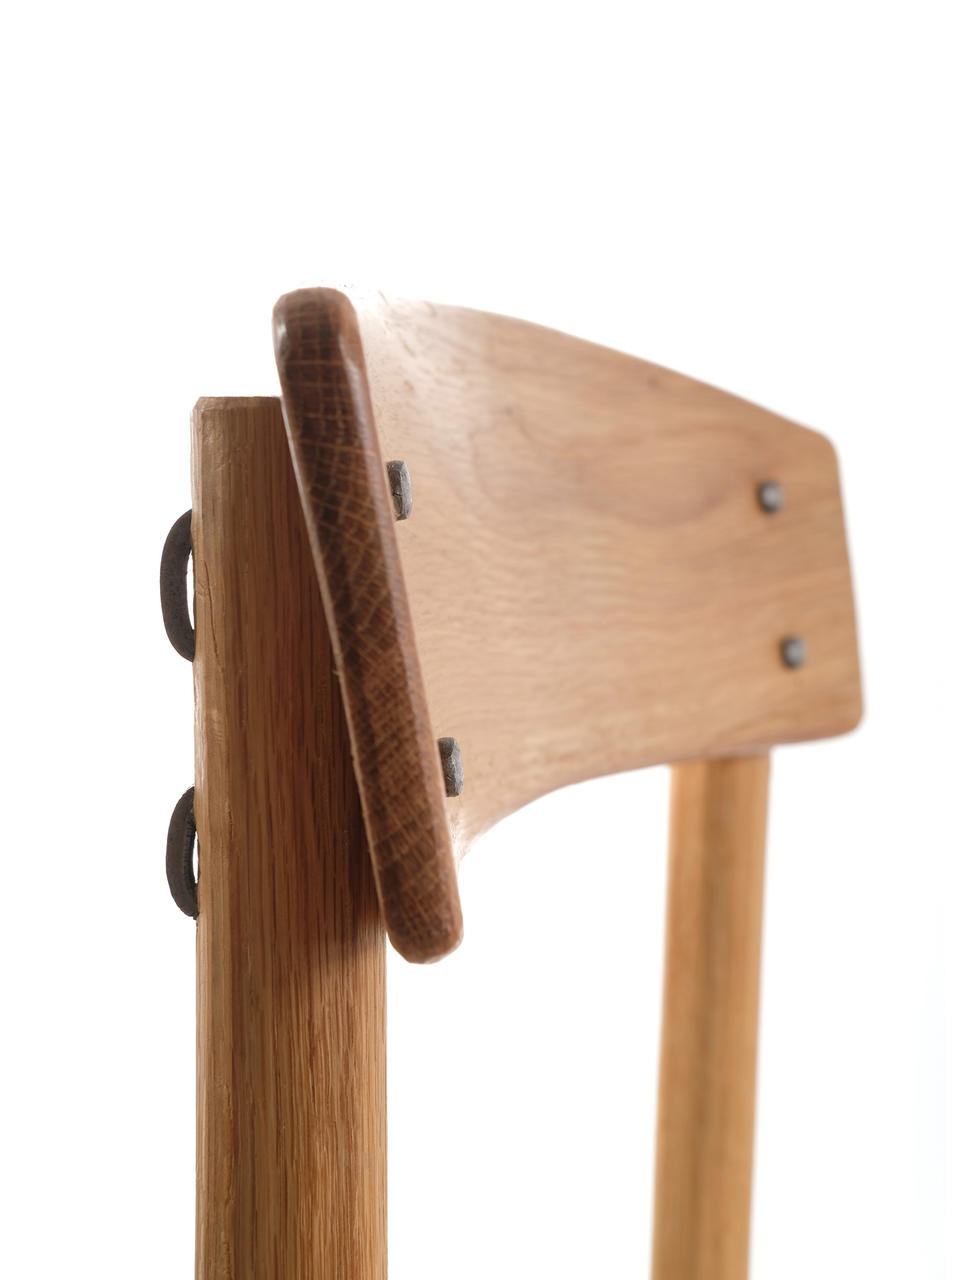 Detail photo of Kentucky Danish showing the attachment of the back rest. The original J39 backrest is attached via screws covered by wood plugs. Screws were out of reach of the craftspeople of the Appalachian Mountains in the 18th and 19th century, so instead the backrest of Kentucky Danish is attached with cut and clinched nails.